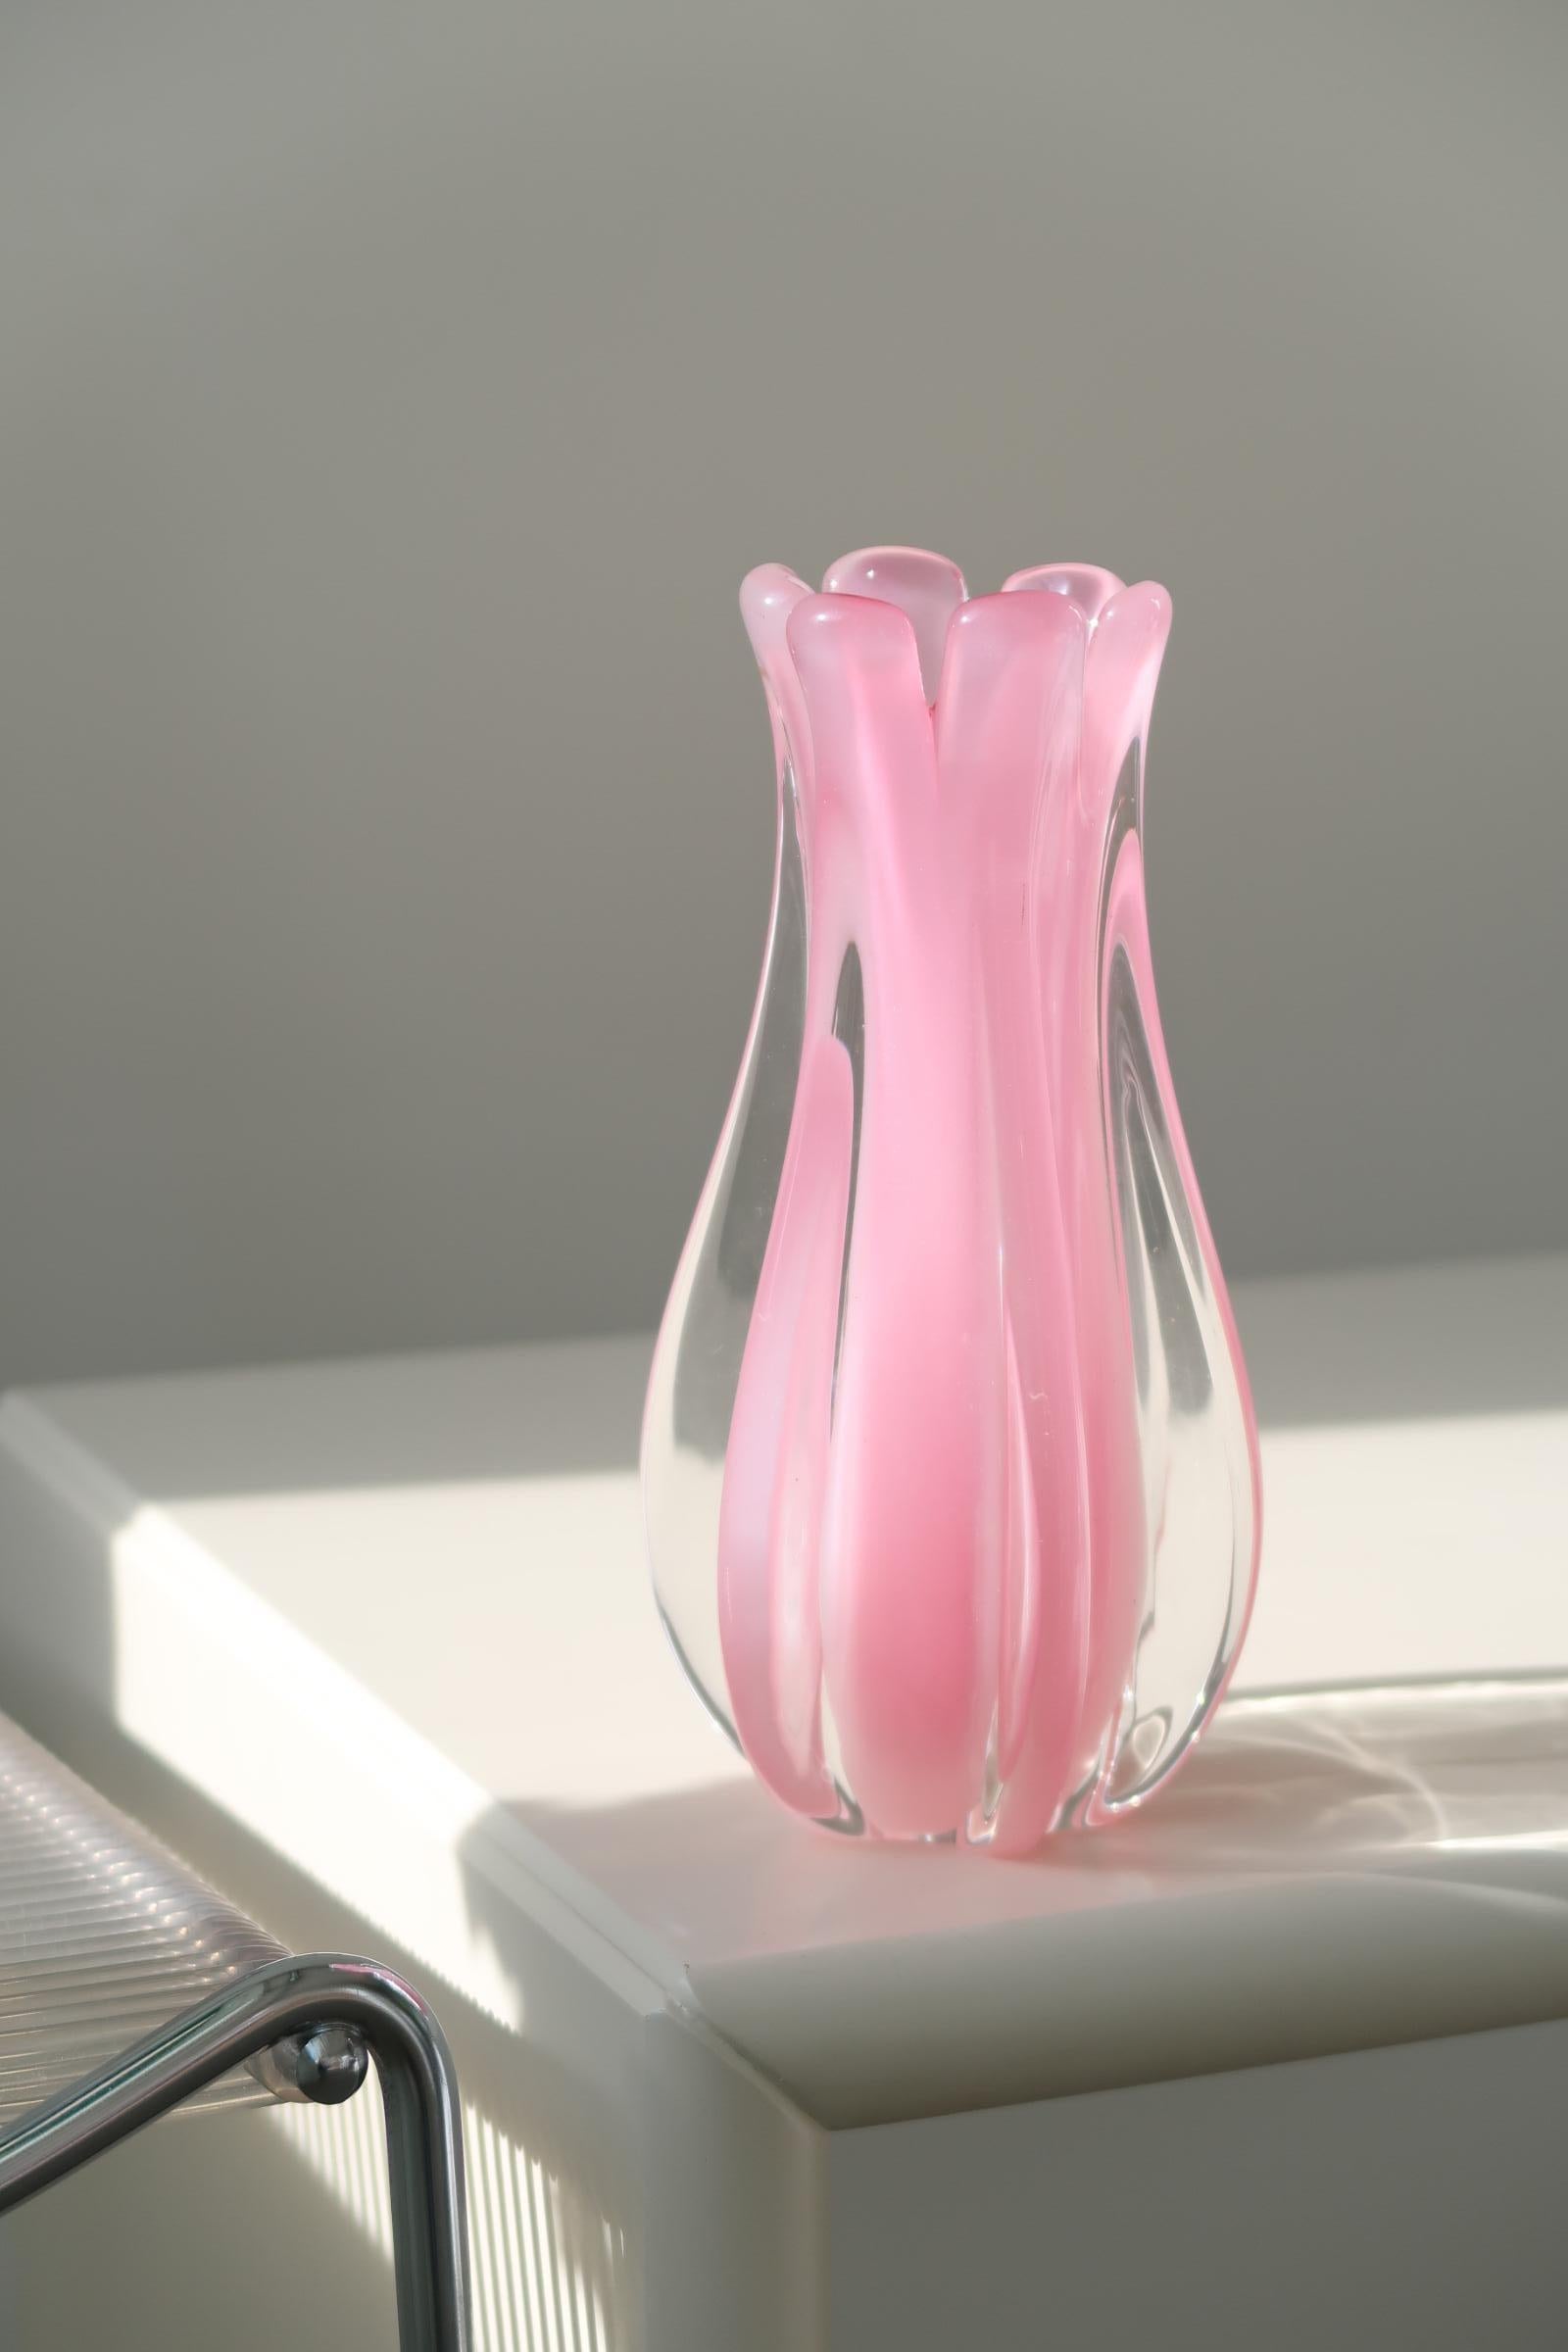 Vintage Murano vase in pink / pink alabaster glass. This type of glass has become a collector's item due to its rarity and the absolutely stunning shade. The vase is mouth-blown in an organic form. Handmade in Italy, 1950s/60s. H:20cm D:11cm.

